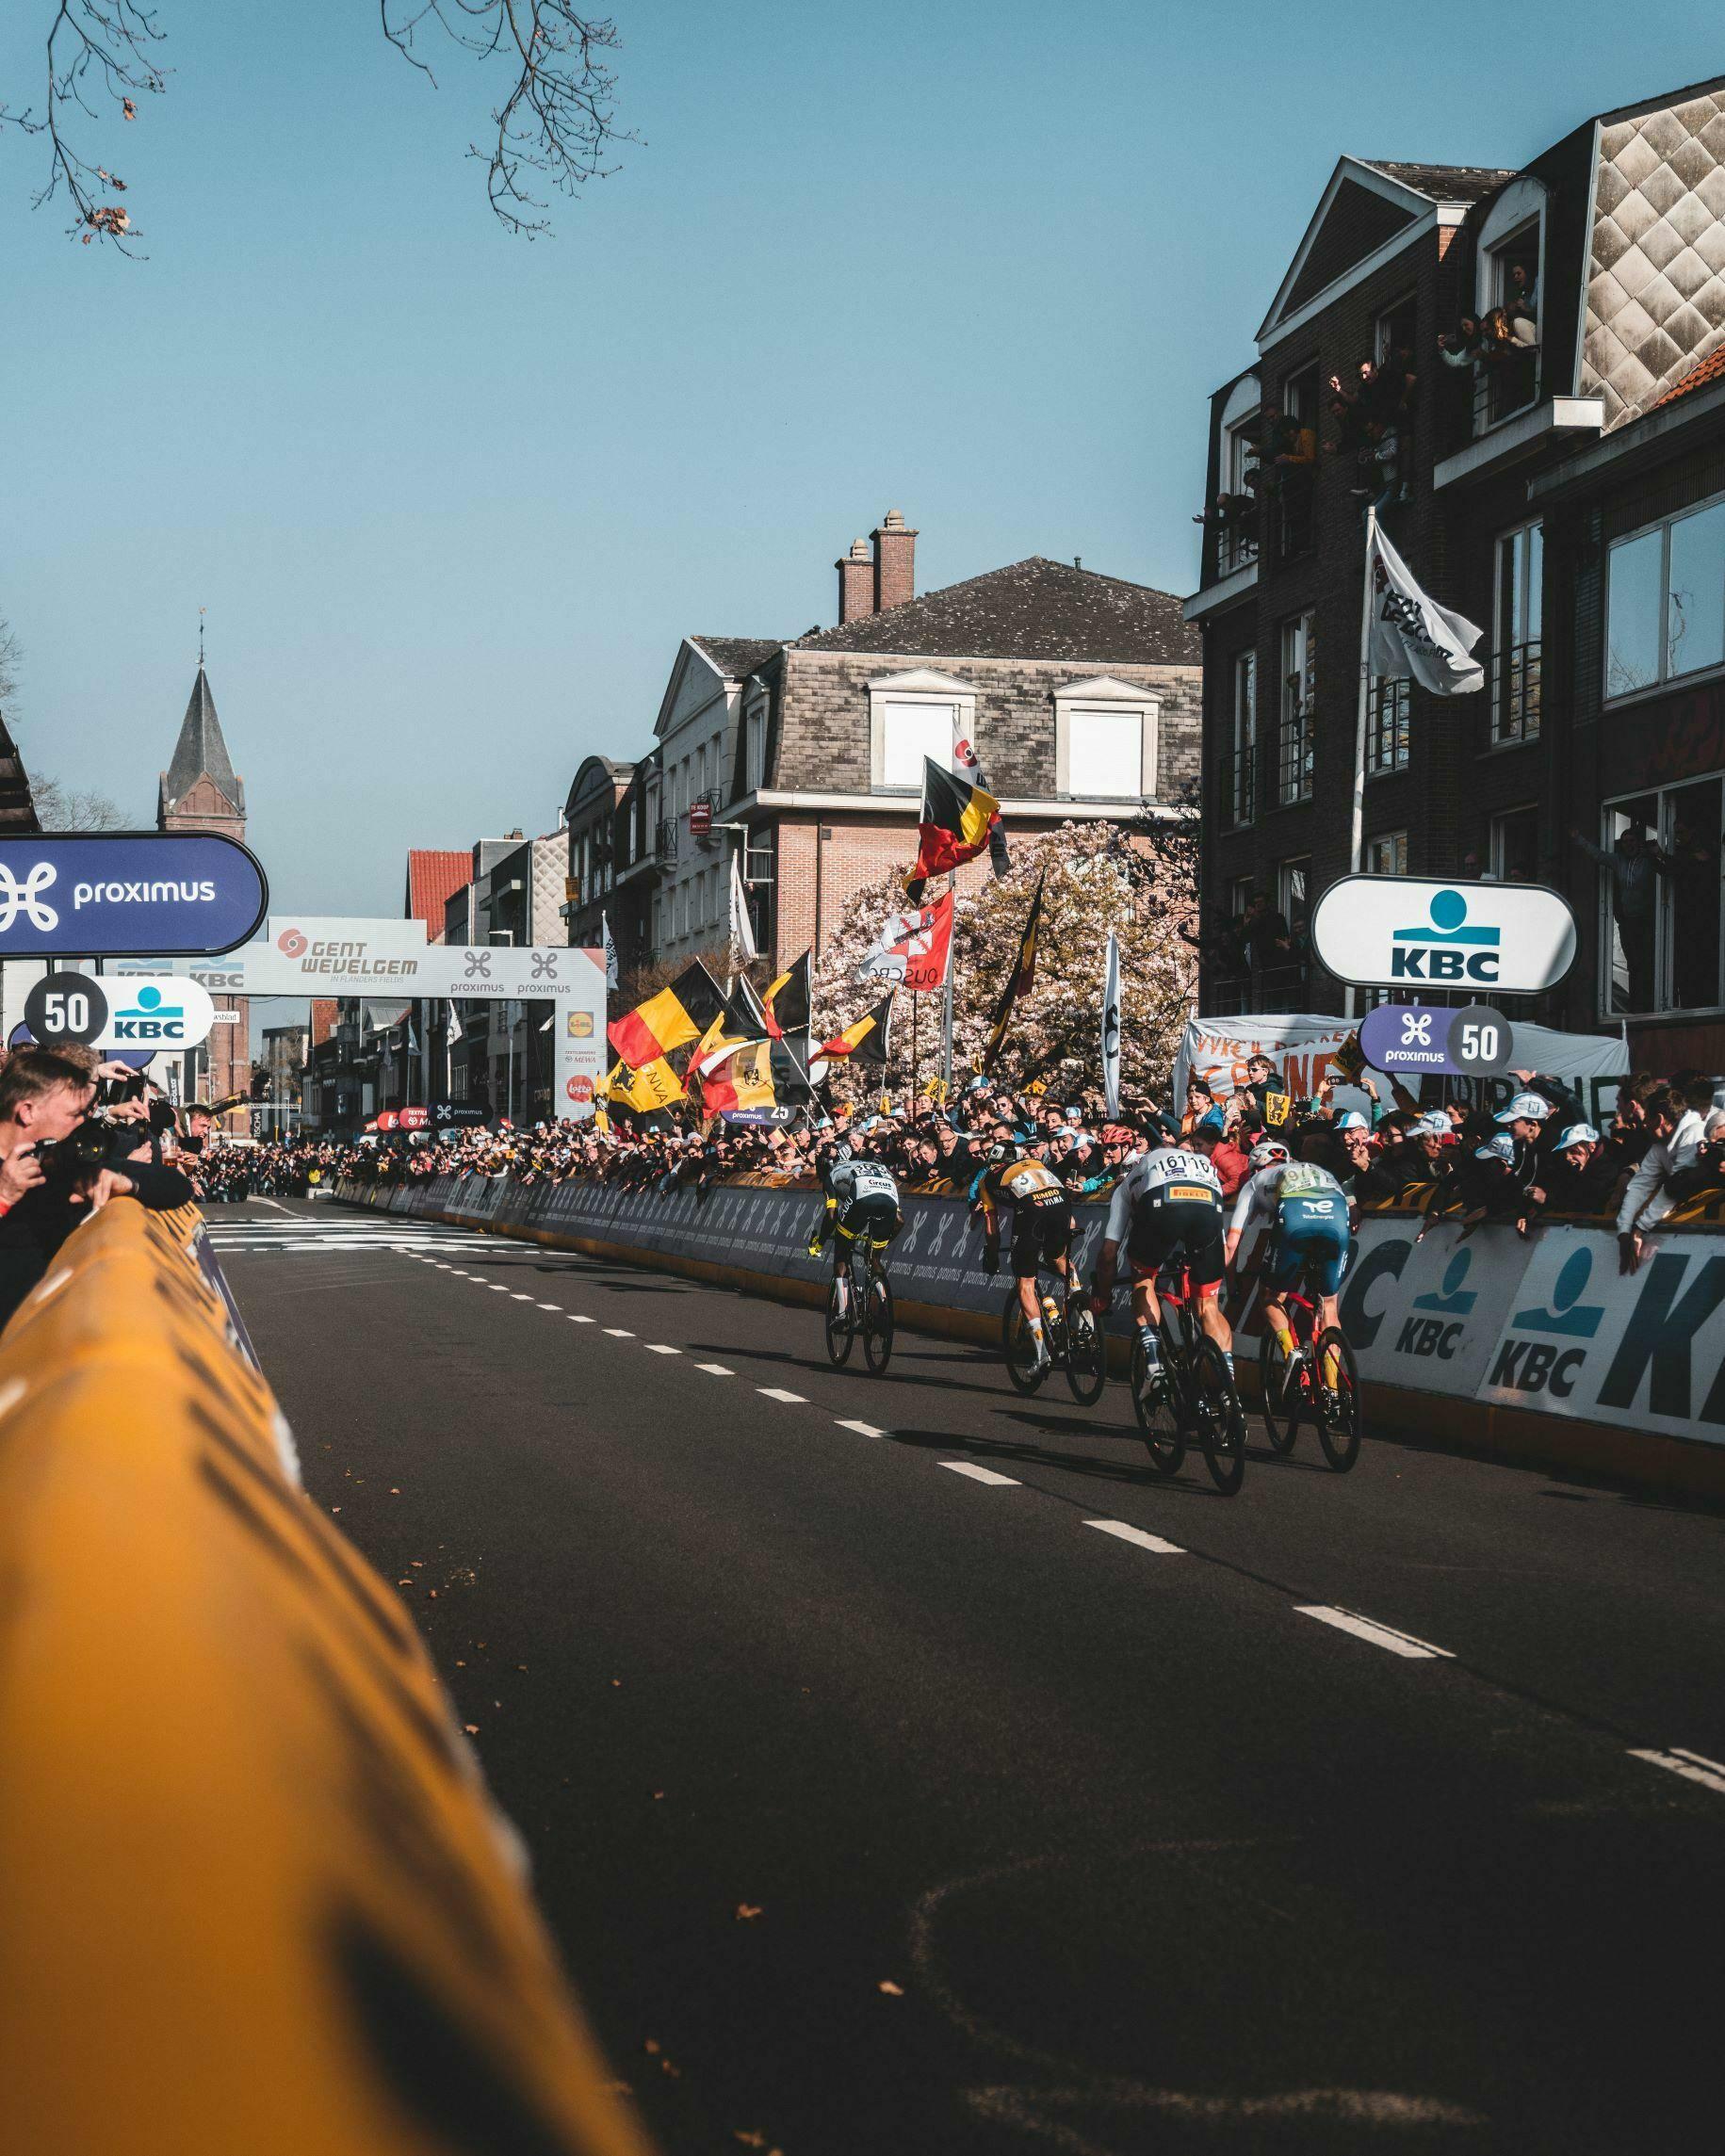 Start the race weekend at the Gent-Wevelgem Opening night